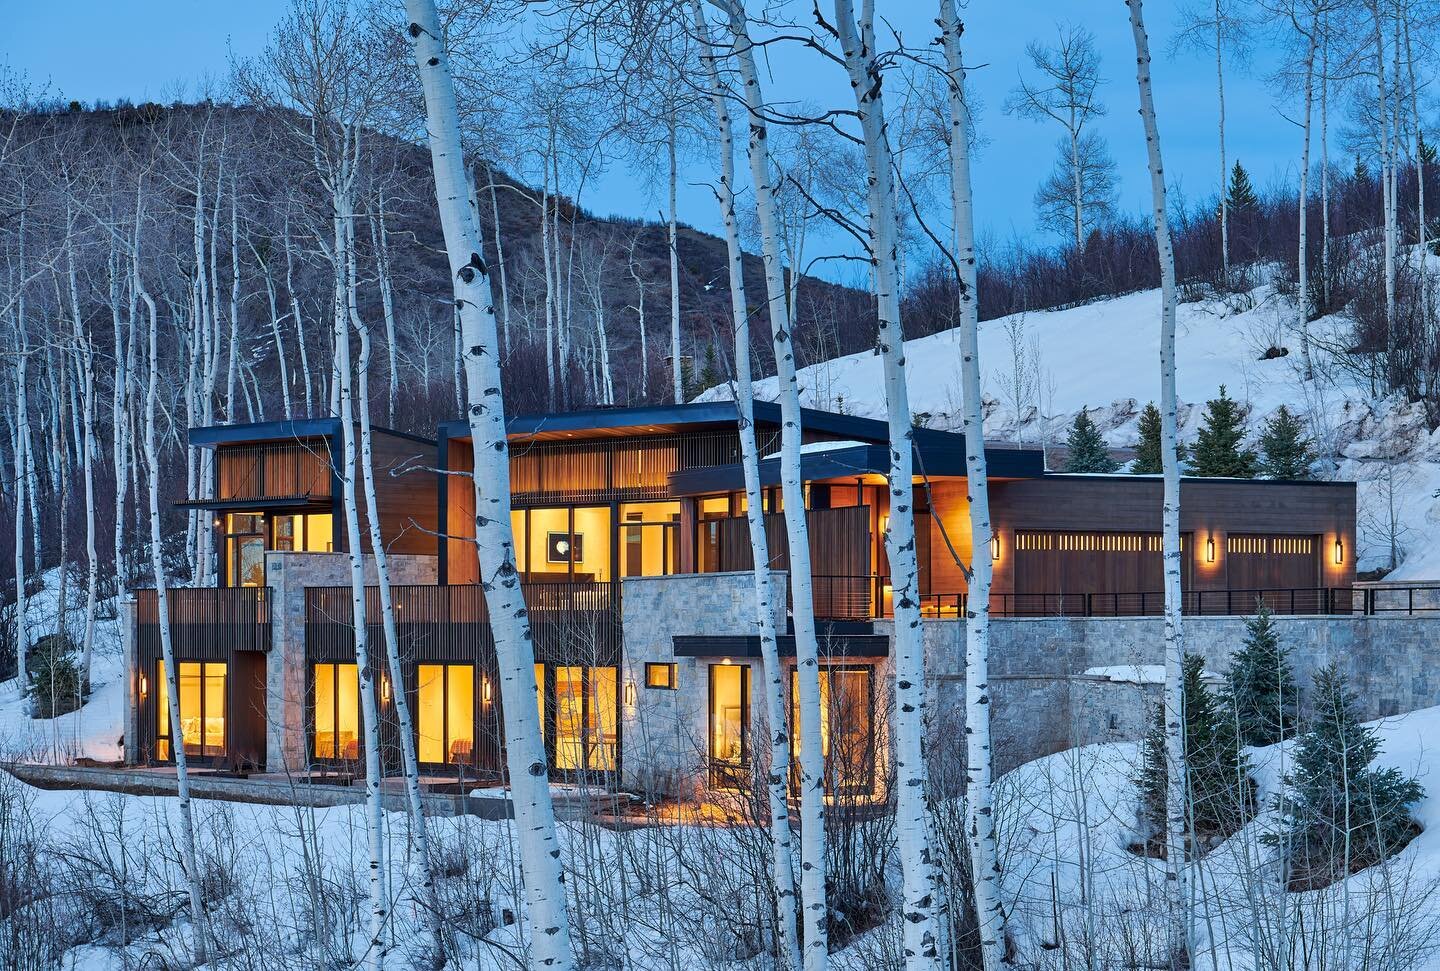 We designed a series of wood fin panels to unify the design and serve a multitude of uses. Check them out!

#kadesignworks 
📸 @dallasandharrisphoto 
@janckilaconstruction 
.
.
.
.
#aspensnowmass #aspenarchitects #aspenarchitecture #mountainmodern #m